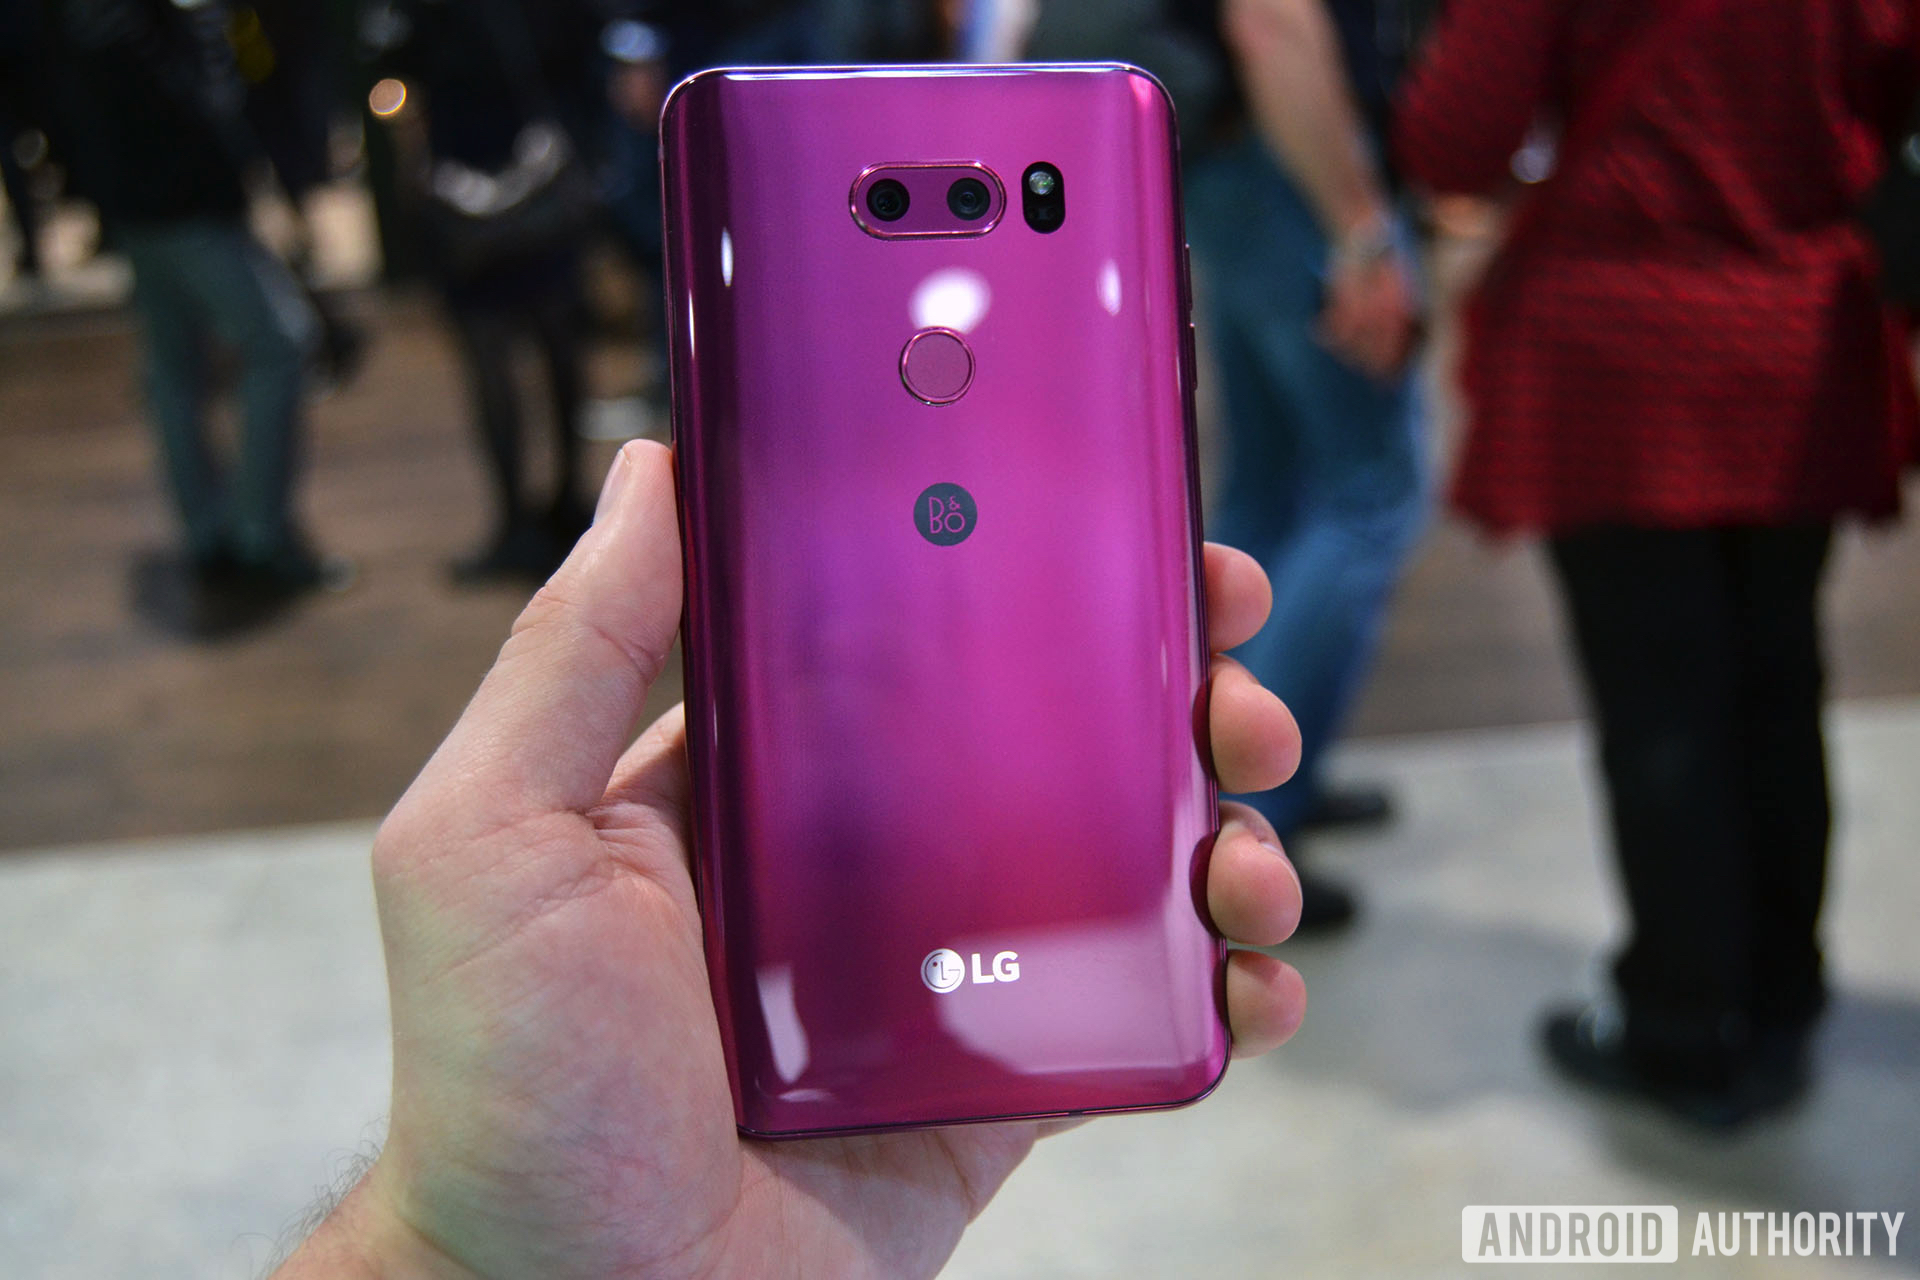 [Exclusive] LG Electronics chief orders revision of 'G7' smartphone from scratch